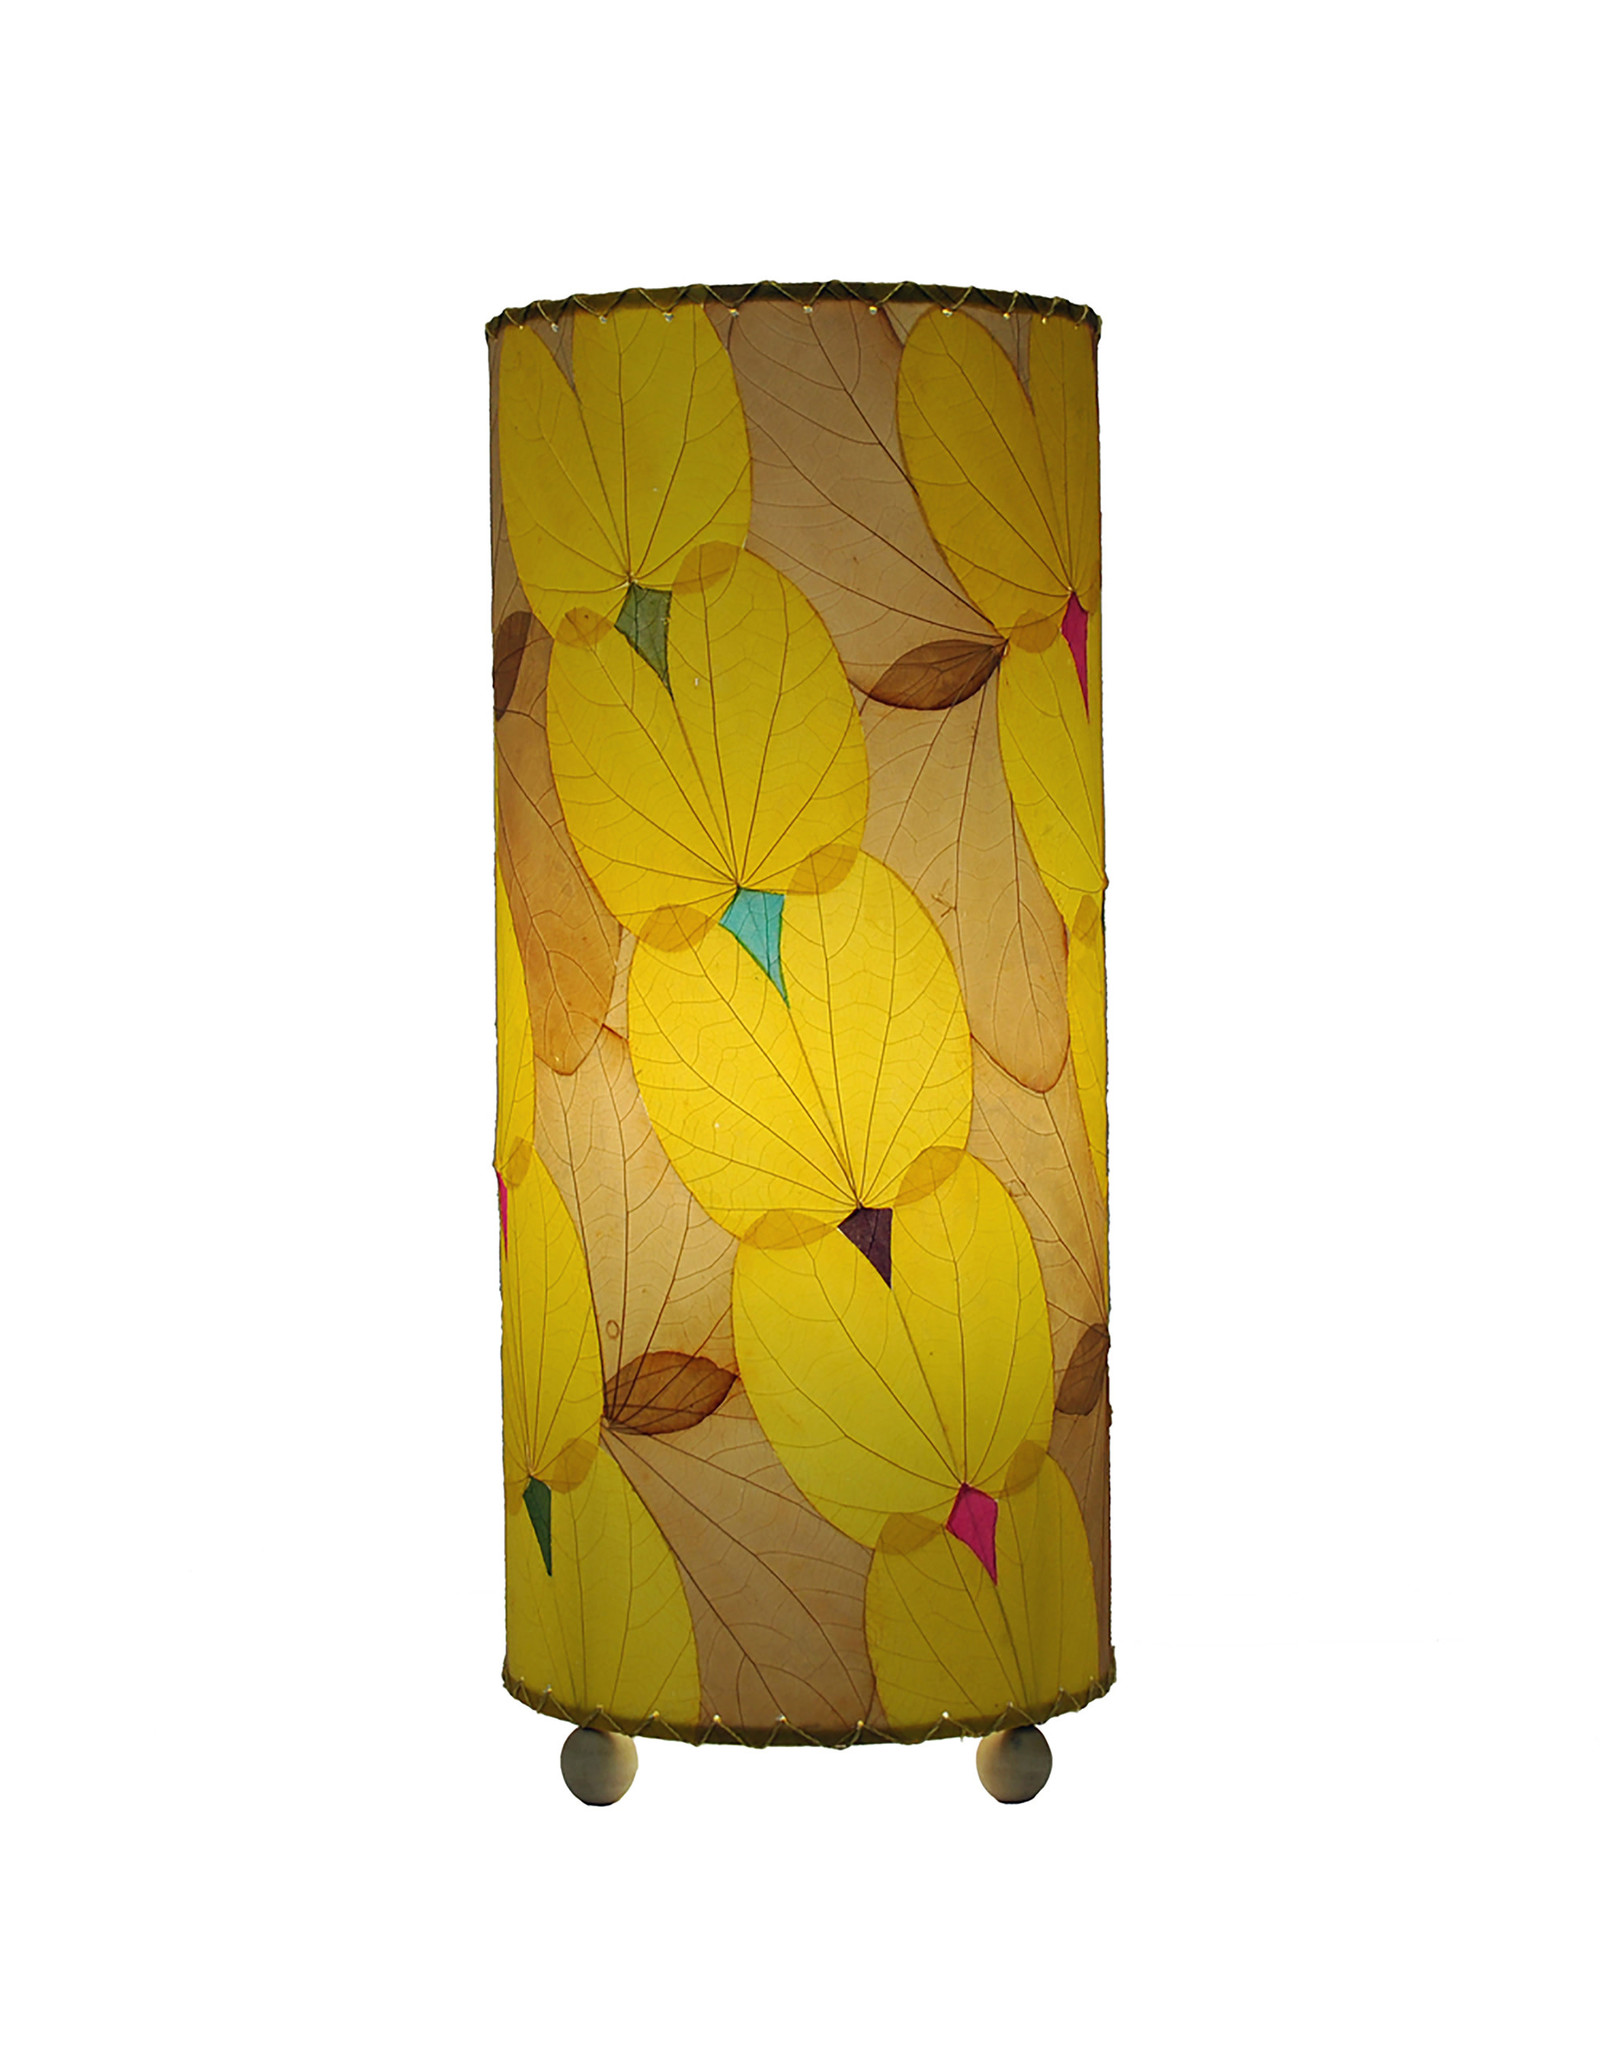 Eangee Home Design Lamp, EANGEE, BUTTERFLY, Cyl. O/I, 17x7", YLW